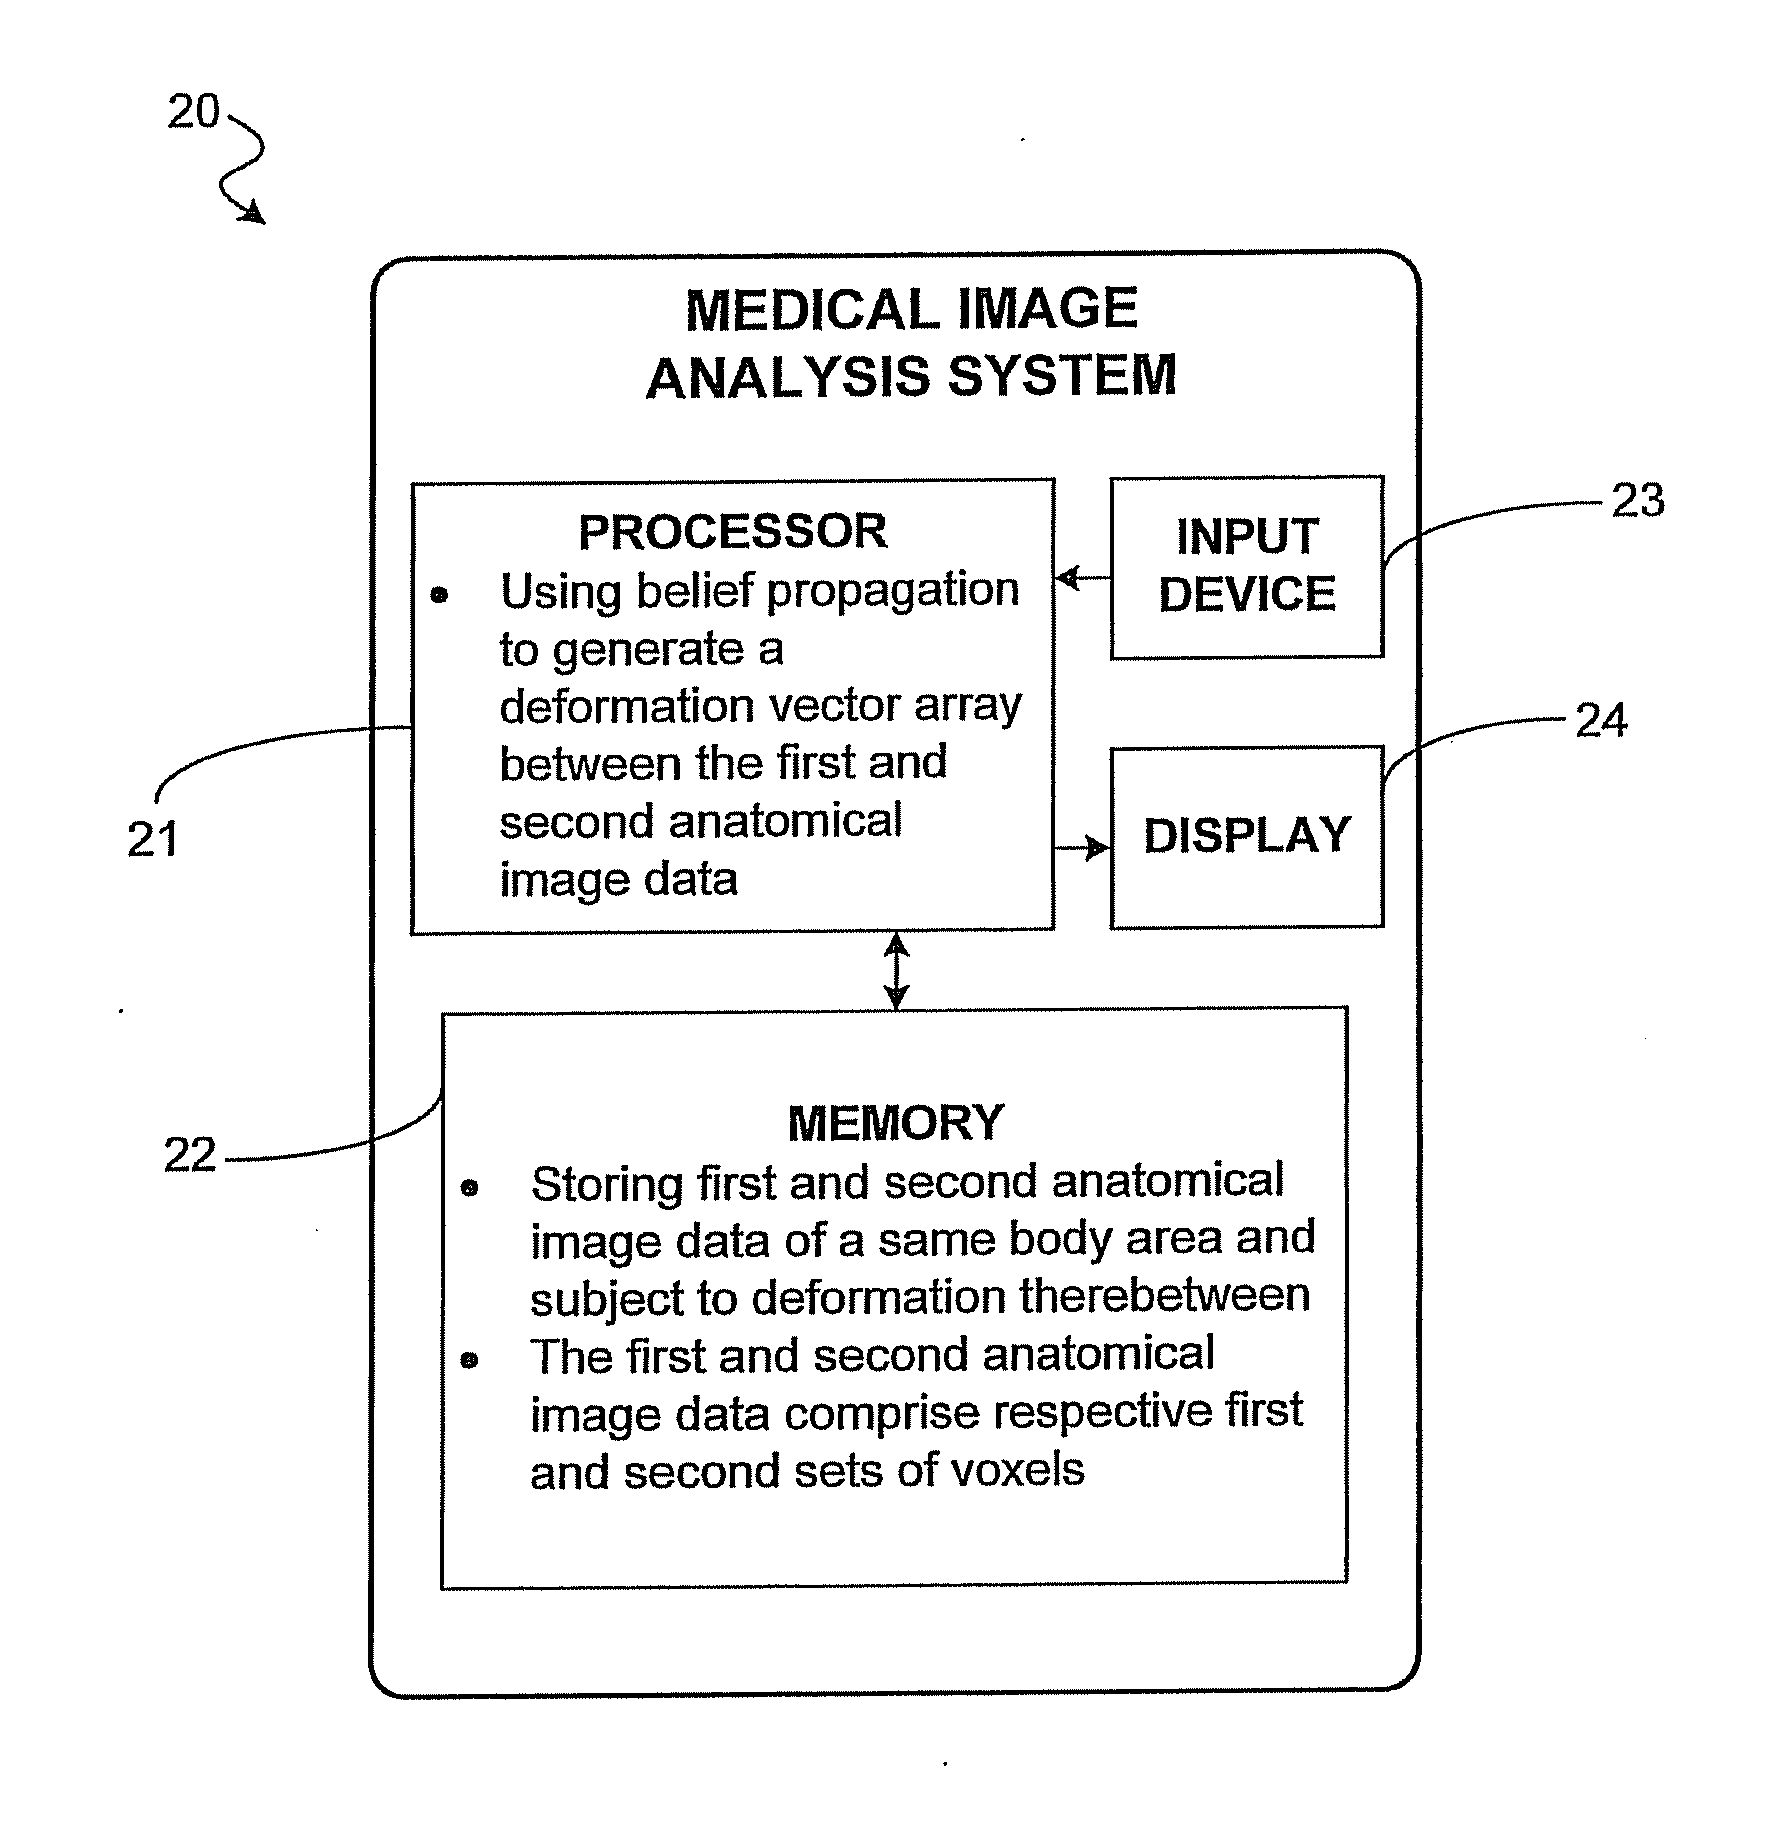 Medical image analysis system using n-way belief propagation for anatomical images subject to deformation and related methods